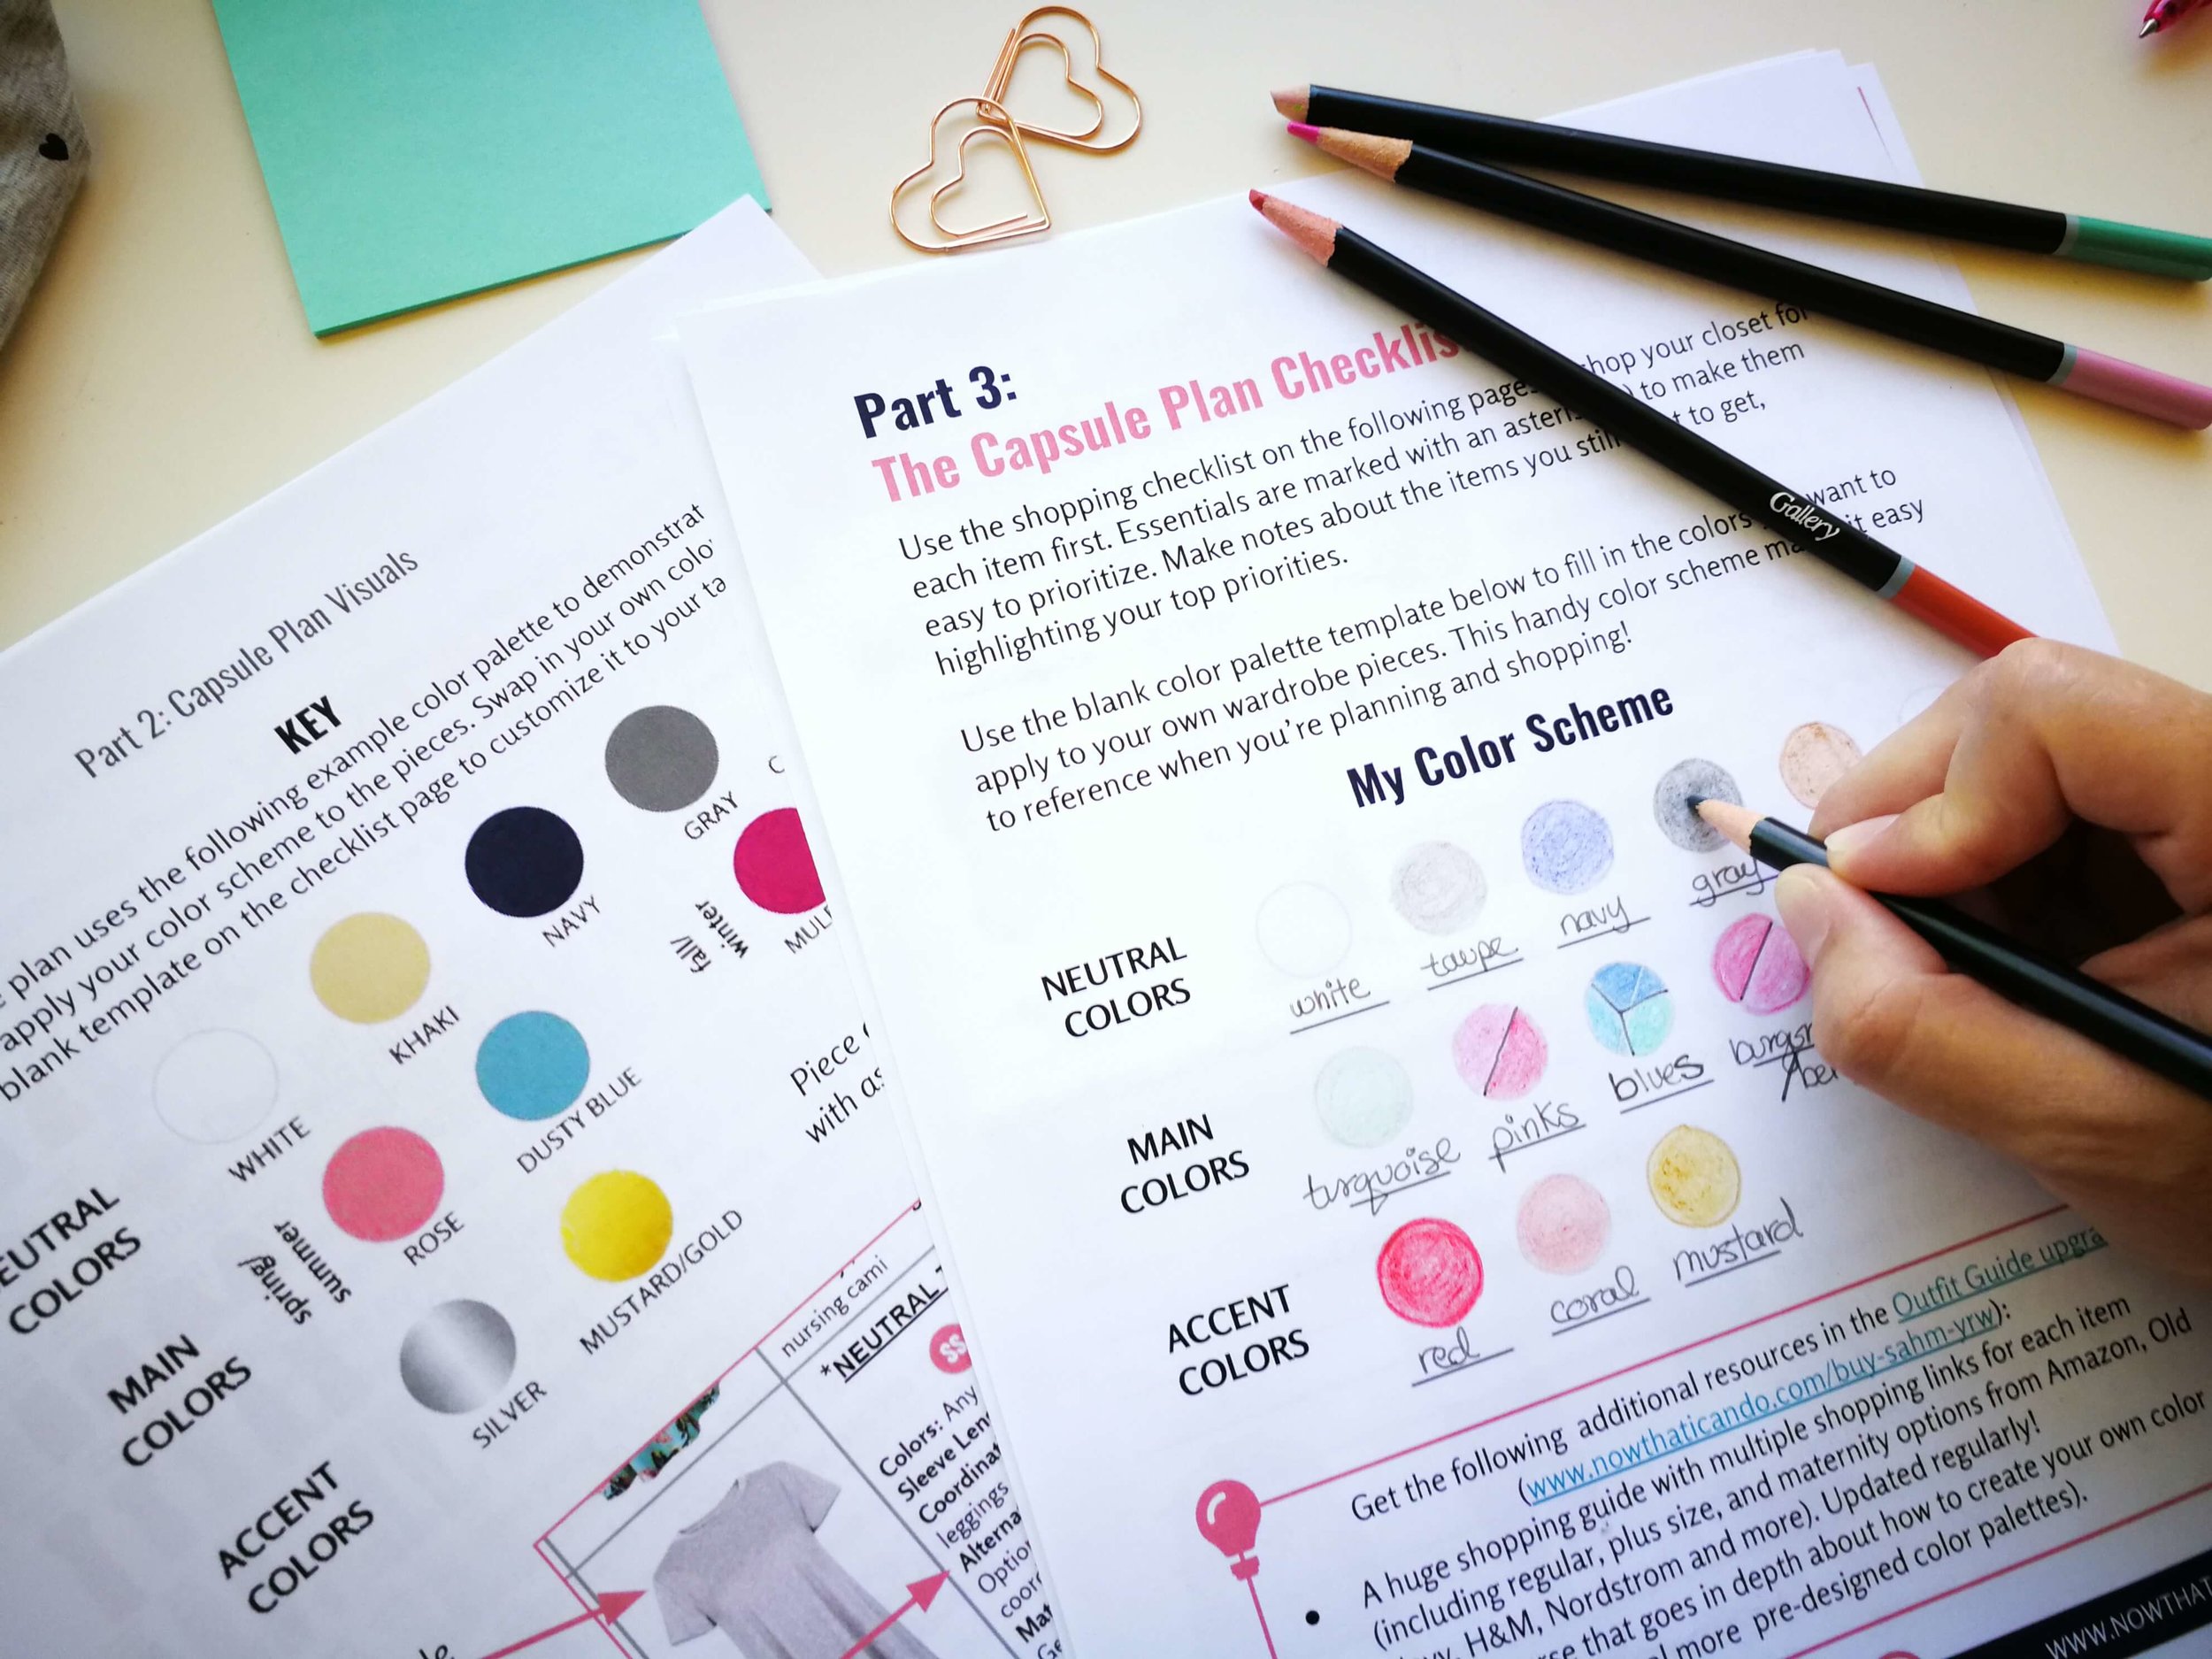  A Benefit of knowing your best colors? You can more easily plan a custom wardrobe color palette that will bring out the best based on your skin undertone, eyes and hair. Download the SAHM capsule plan printable shown above right here ! 